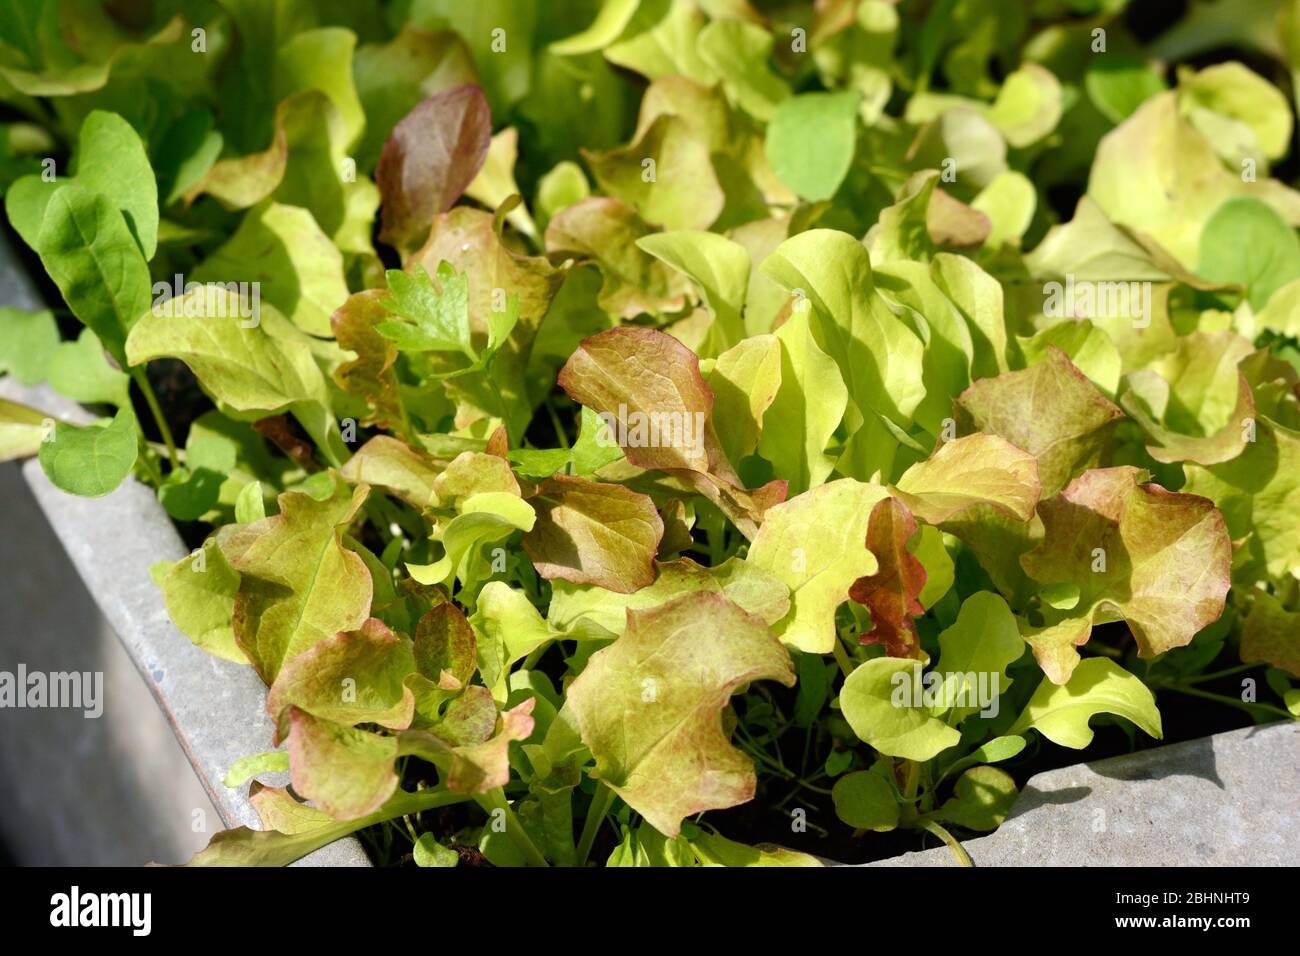 Mixed organic baby salad leaves growing in a container Stock Photo